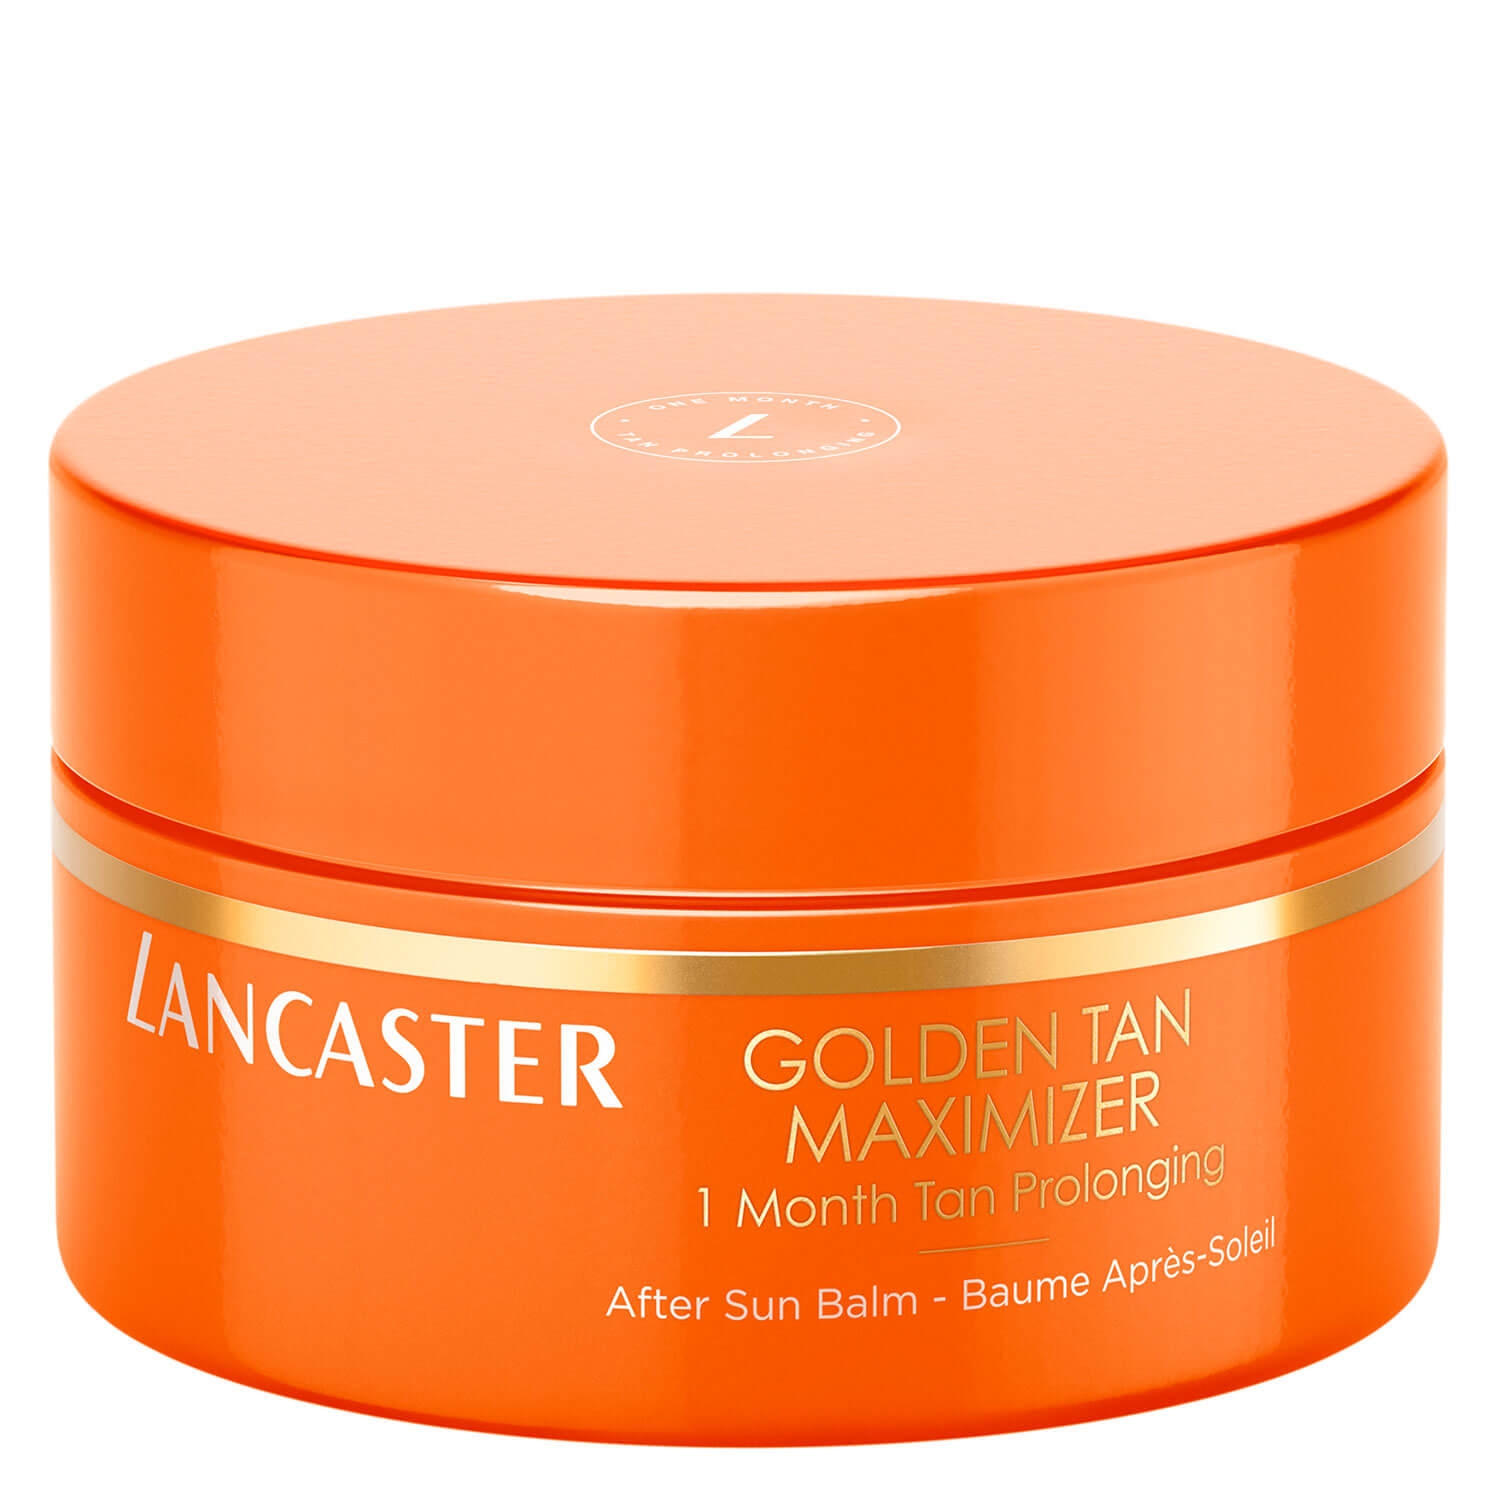 Product image from Golden Tan Maximizer - After Sun Balm